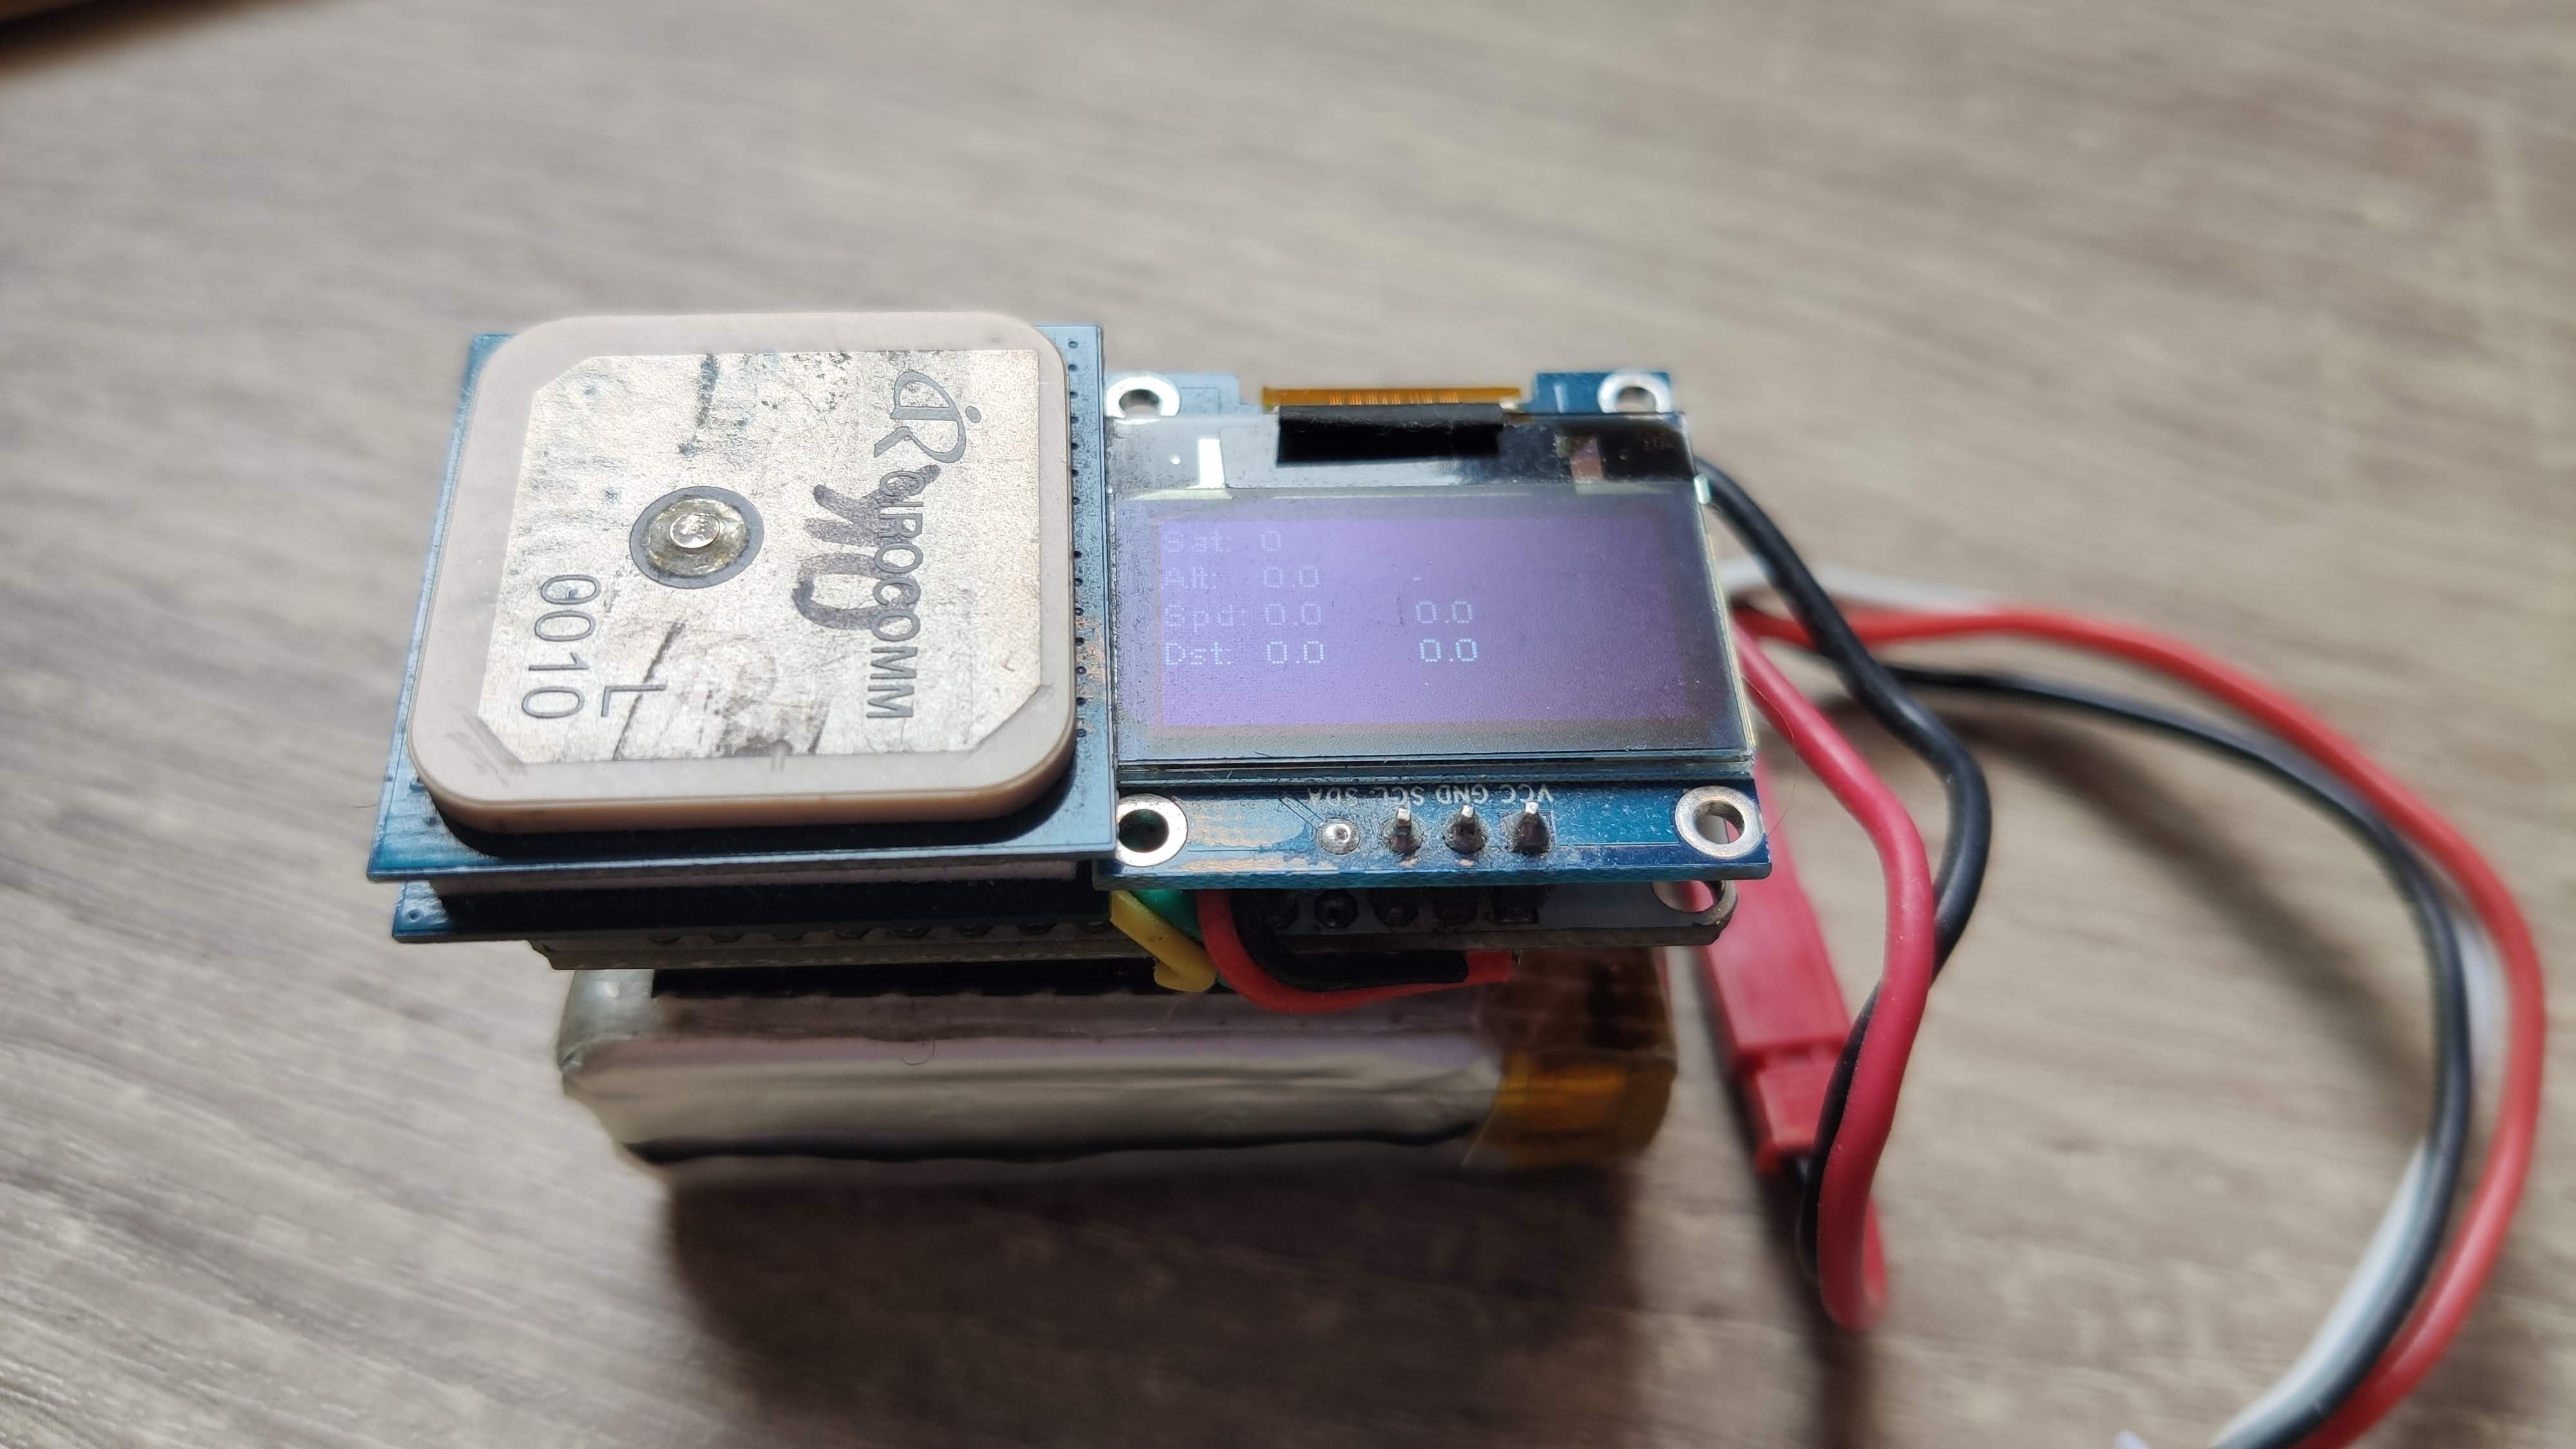 ESP32 with GPS and OLED display